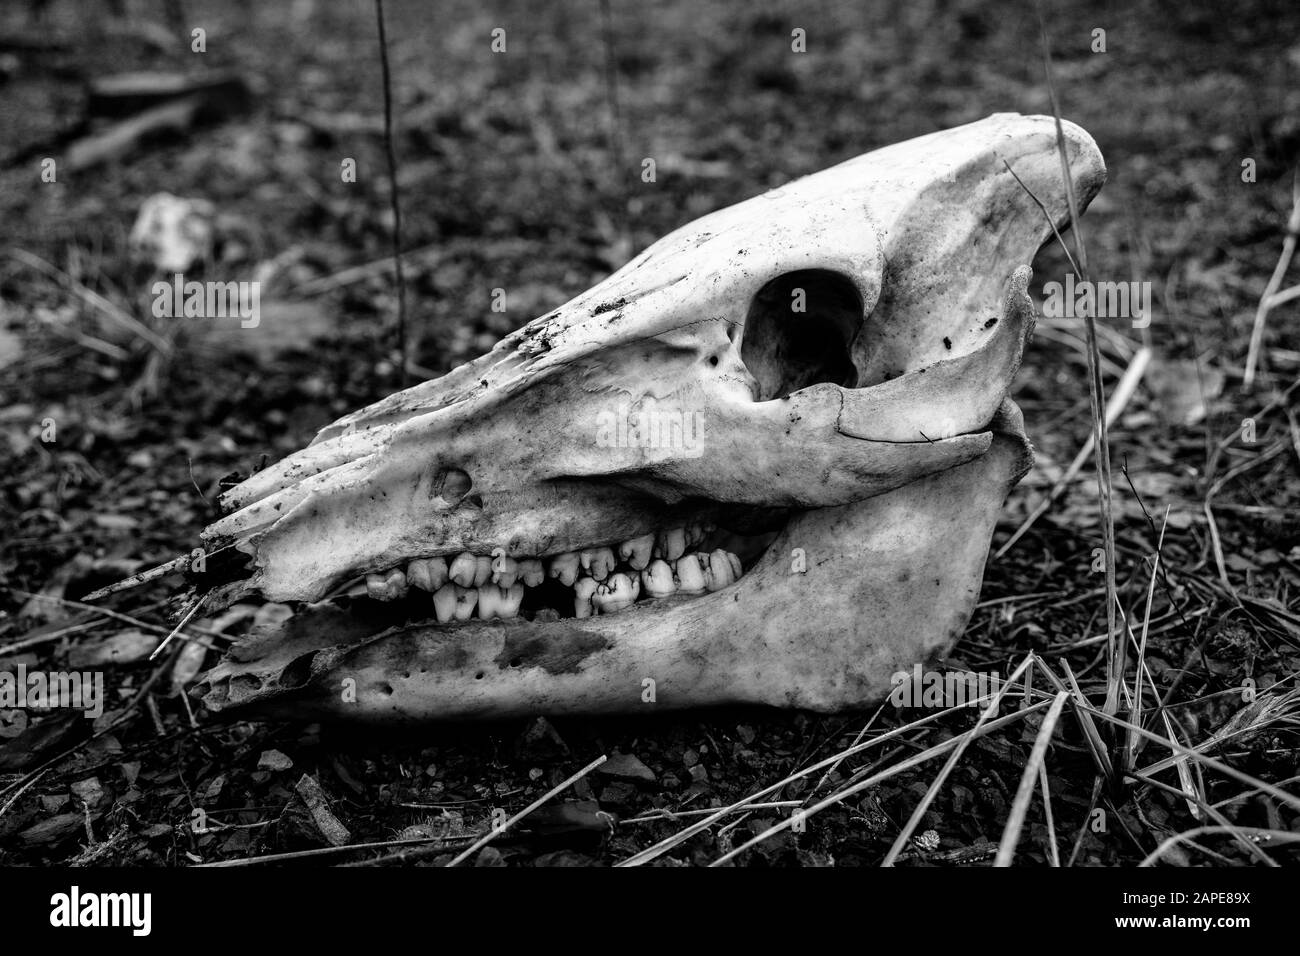 Black and white shot of an animal skull on the ground Stock Photo